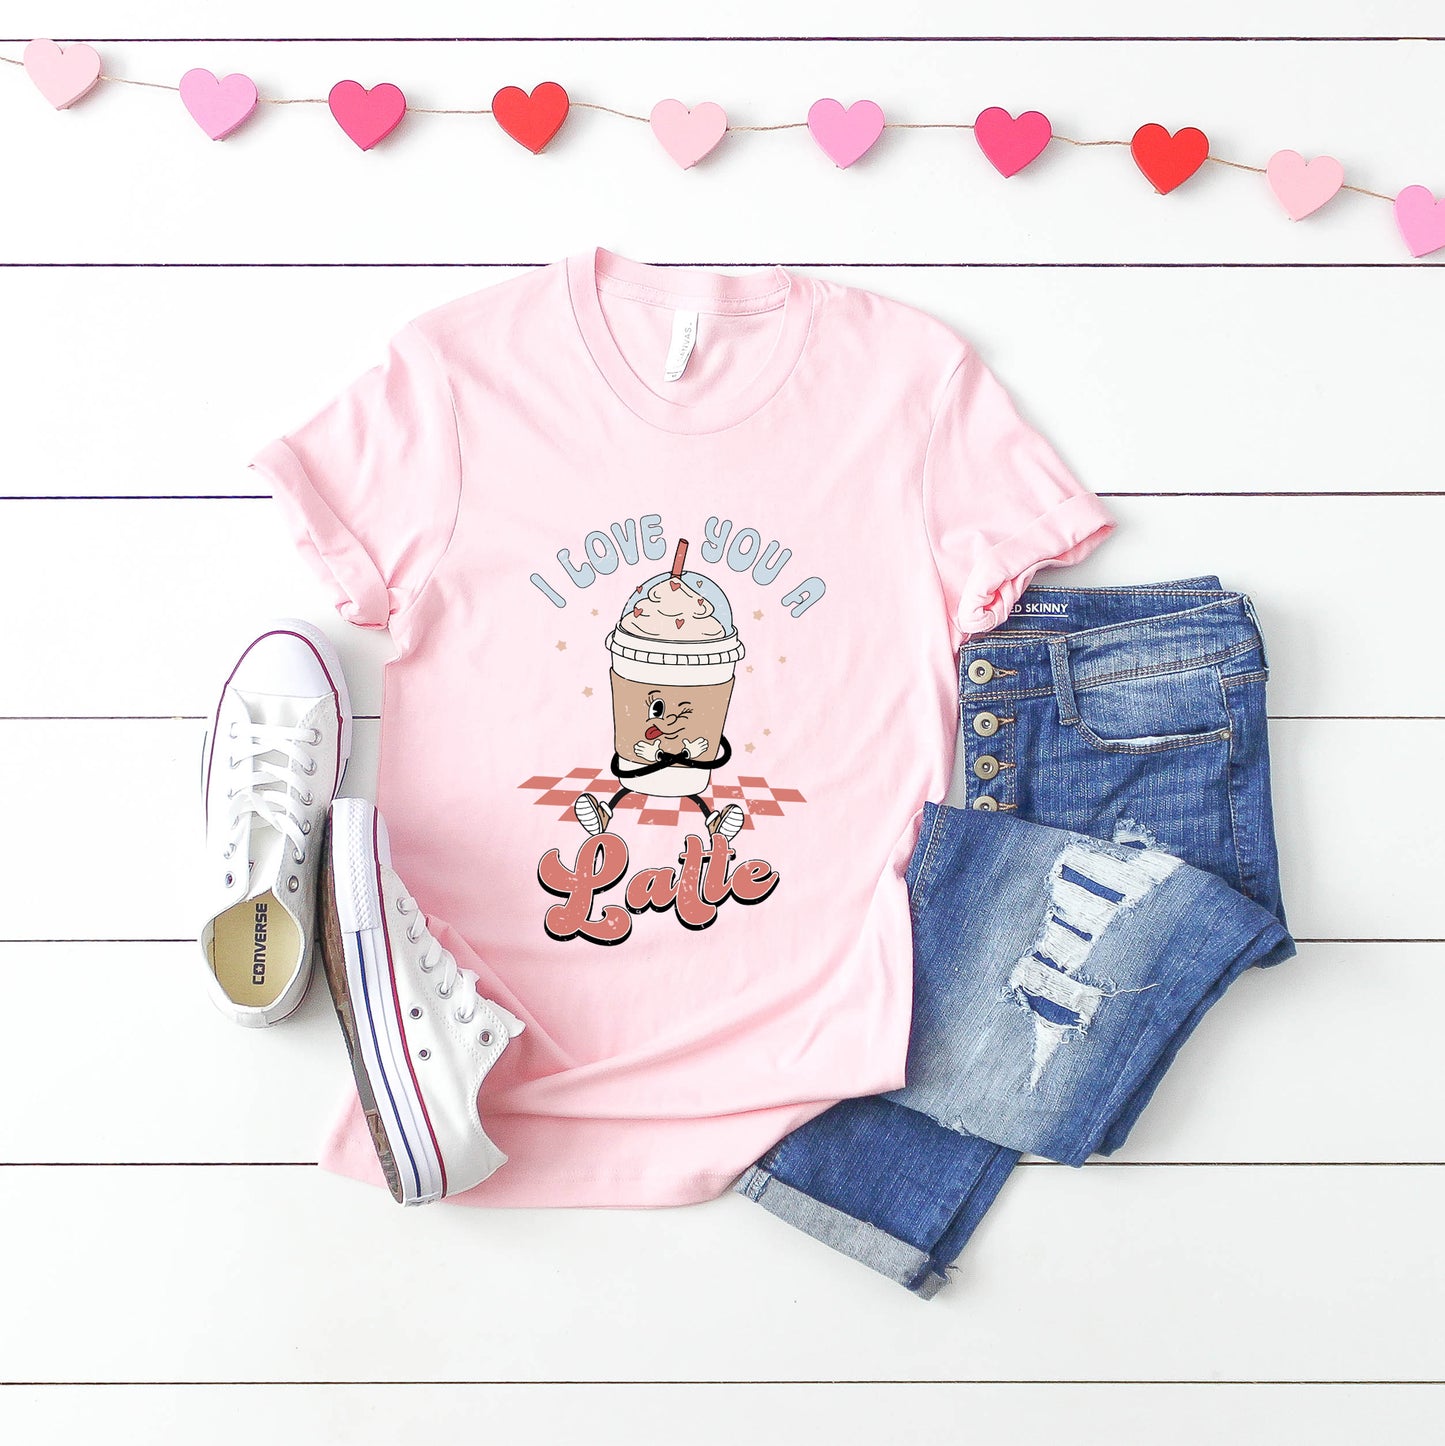 I Love You a Latte | Short Sleeve Crew Neck